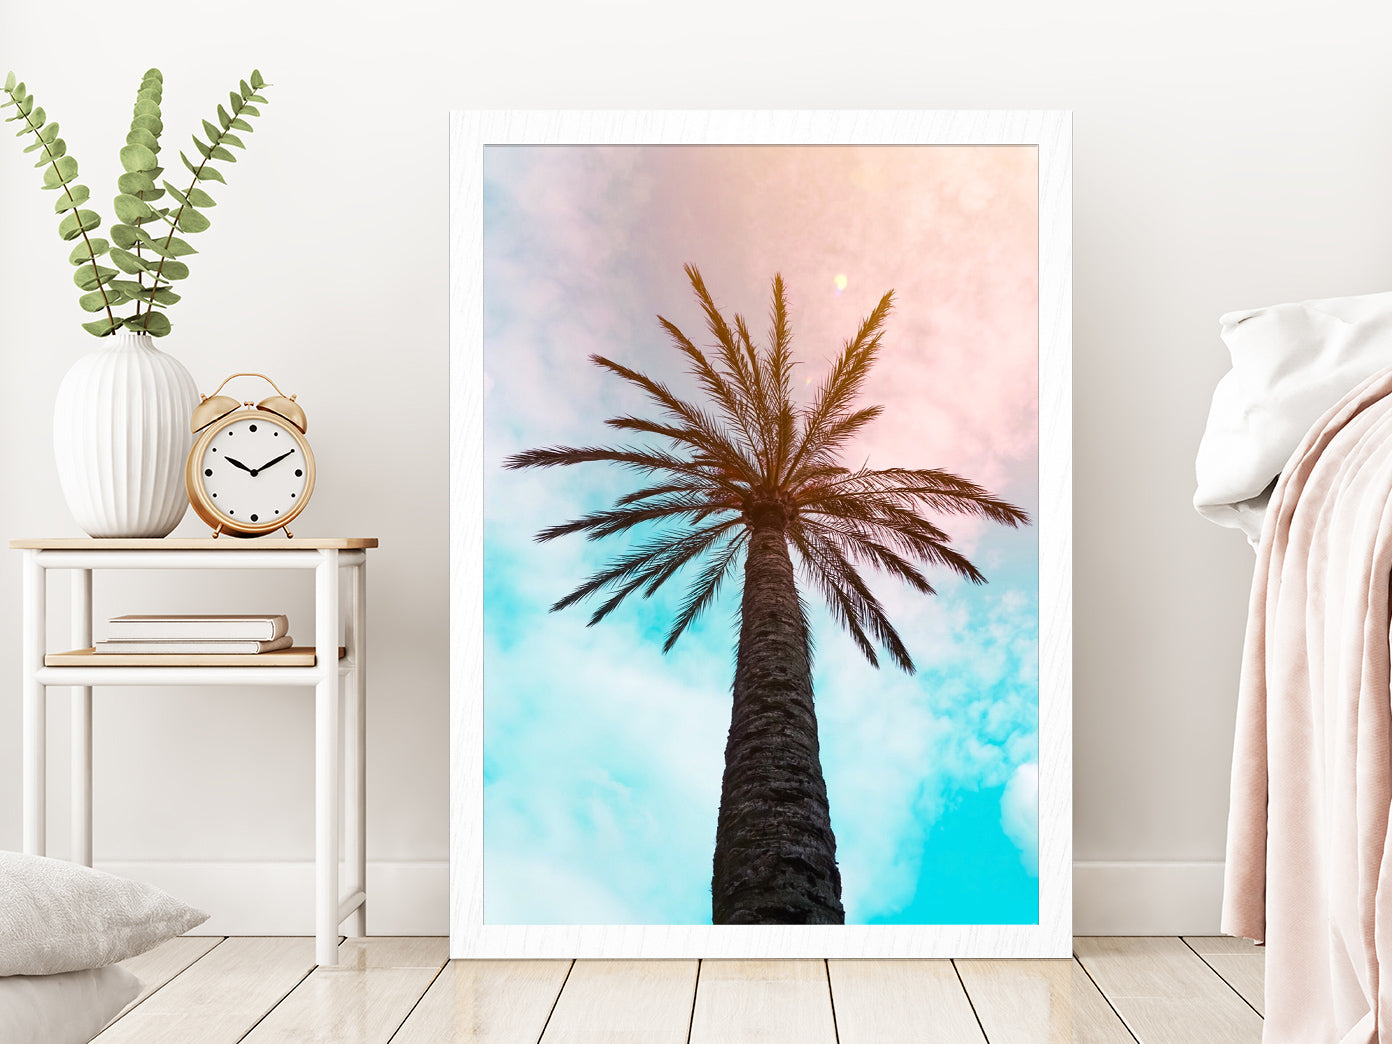 Palm Trees & Blue Pink Sky Scenery Photograph Glass Framed Wall Art, Ready to Hang Quality Print Without White Border White